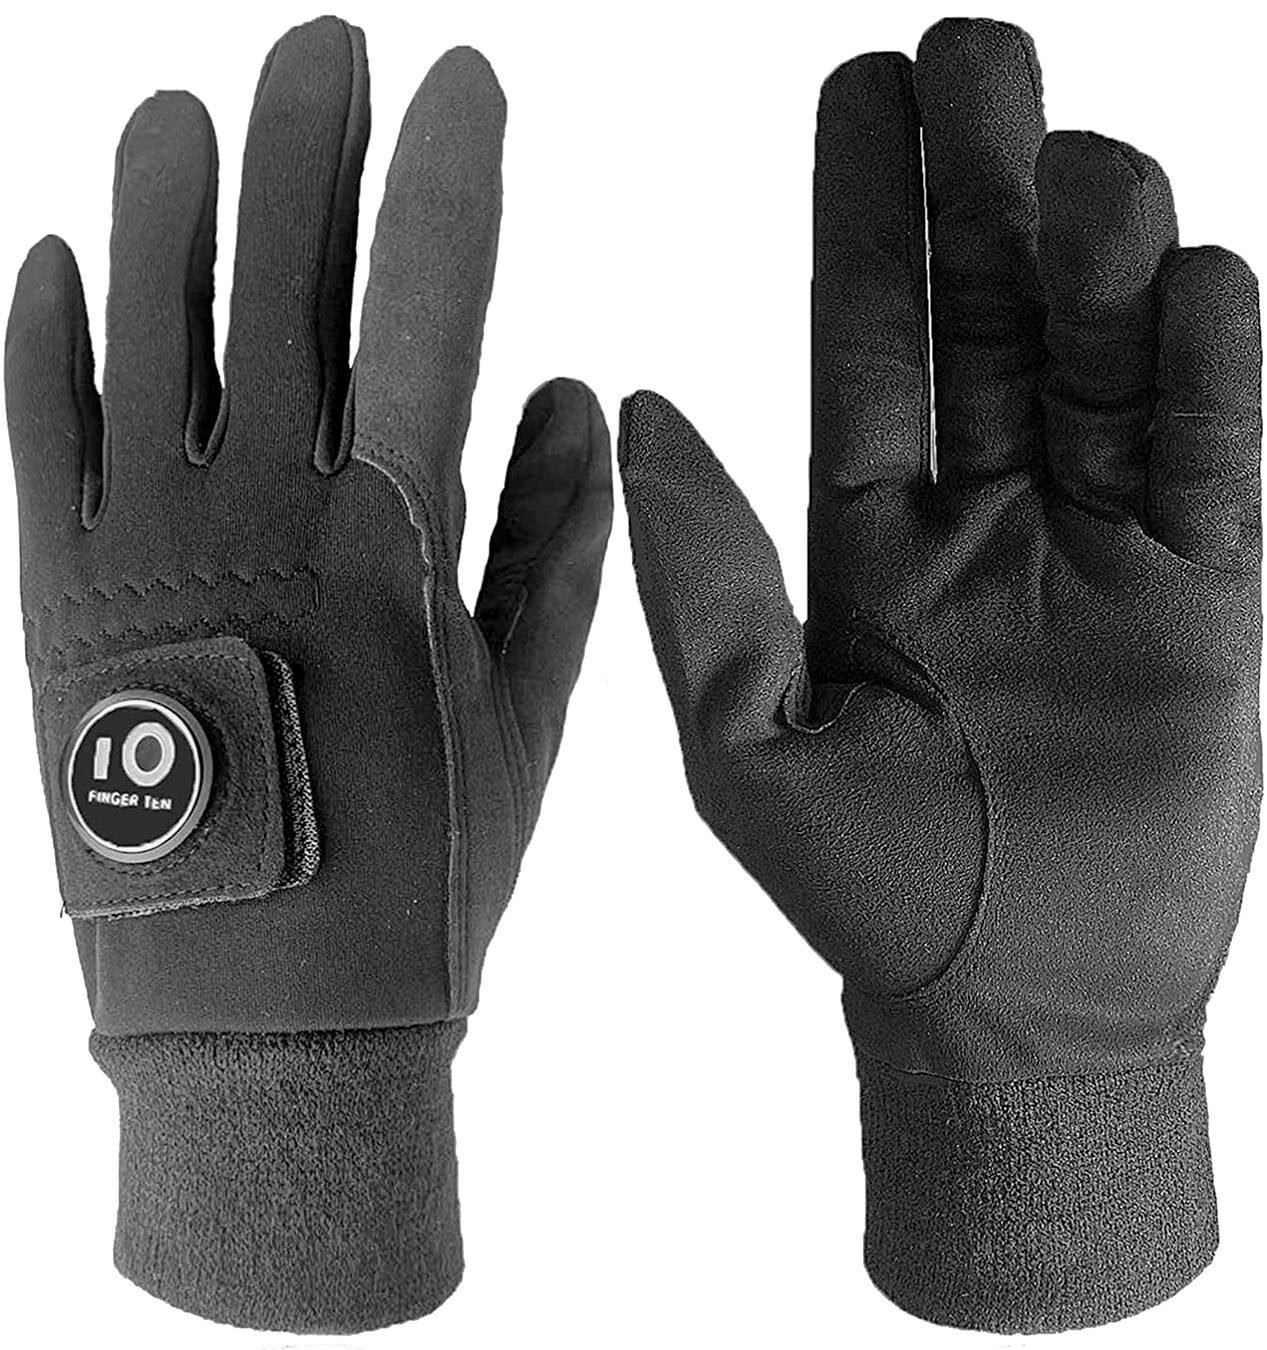 A front and backside view of Finger Ten winter golf gloves